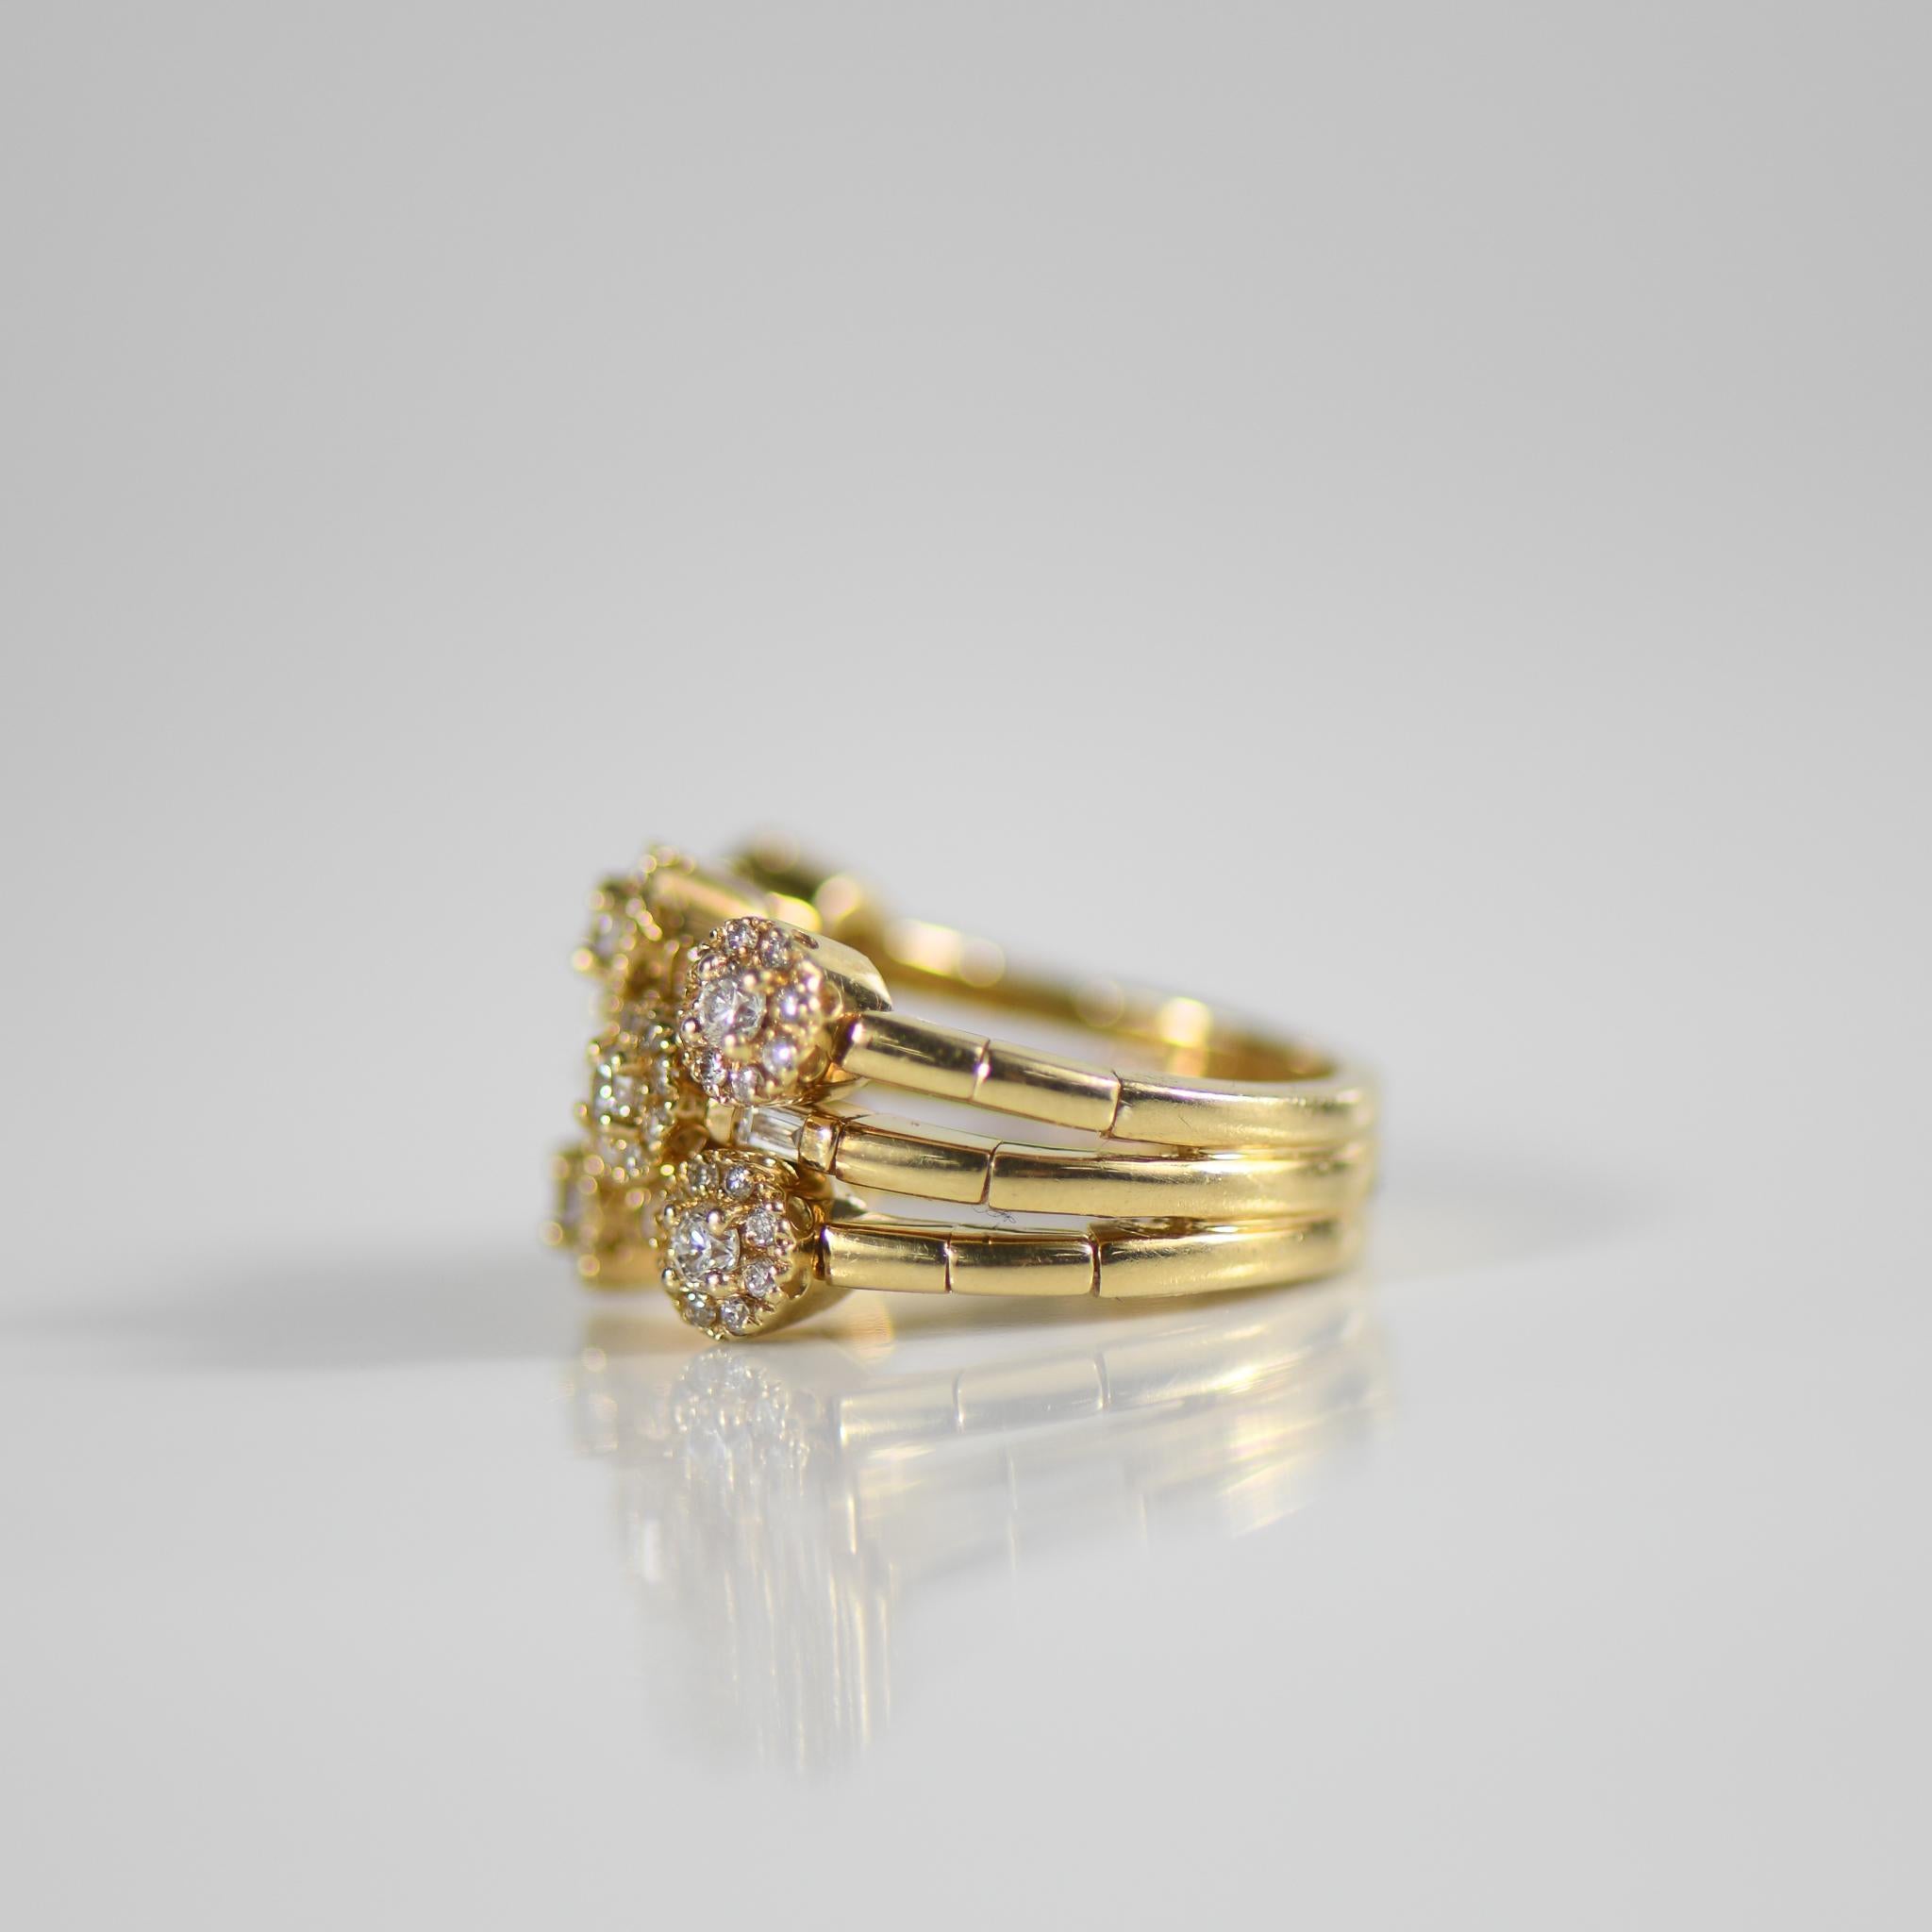 Experience the art of playful elegance with the Sonia B Branded Fidget Ring, a unique and versatile piece designed to captivate. Crafted in luxurious 14k yellow gold, this ring features an articulated, flexible stacked band that moves with your